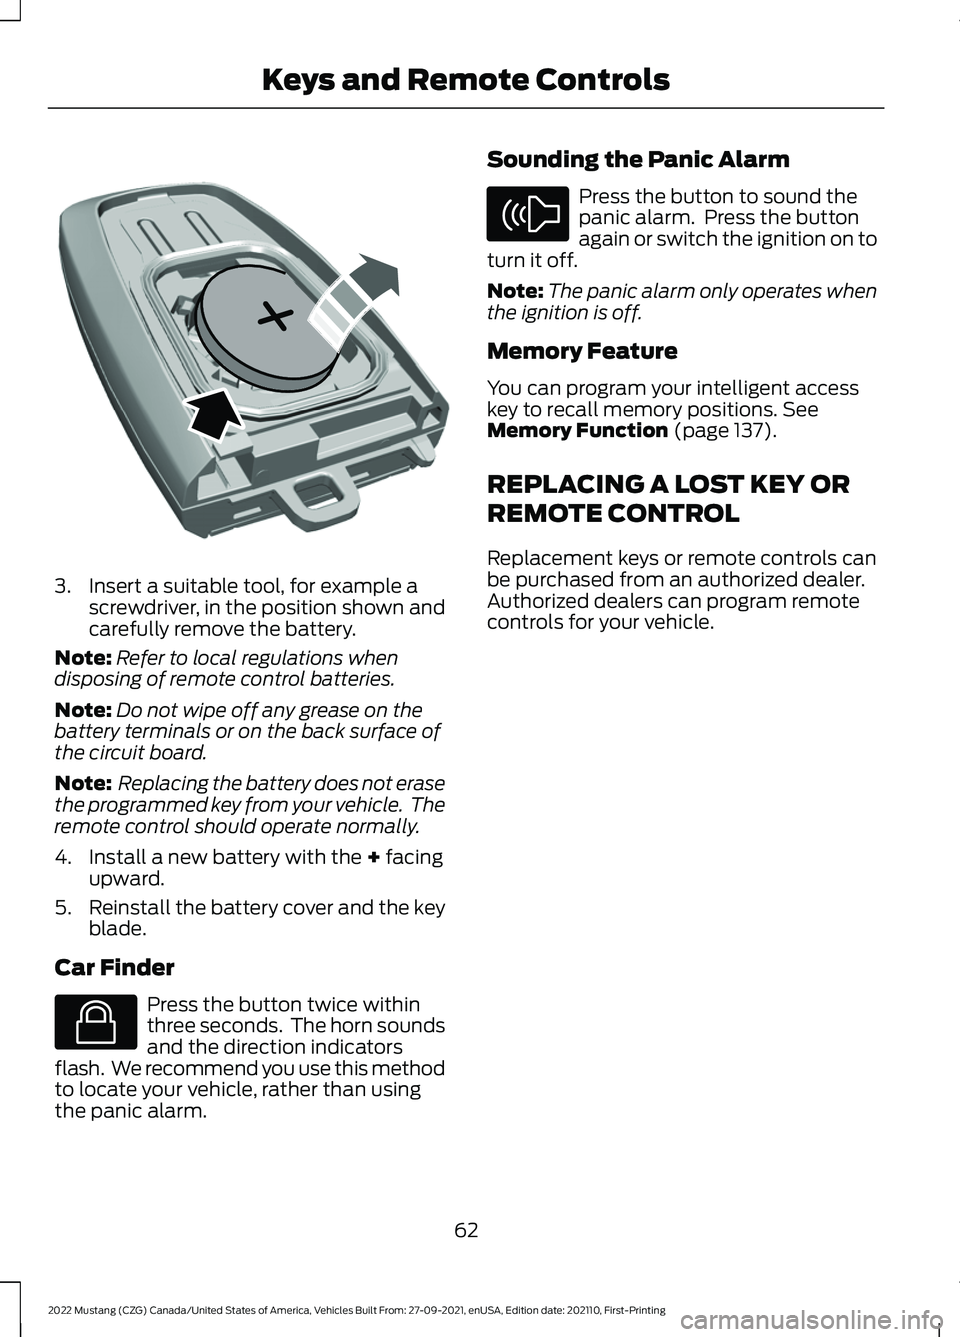 FORD MUSTANG 2022  Owners Manual 3. Insert a suitable tool, for example a
screwdriver, in the position shown and
carefully remove the battery.
Note: Refer to local regulations when
disposing of remote control batteries.
Note: Do not 